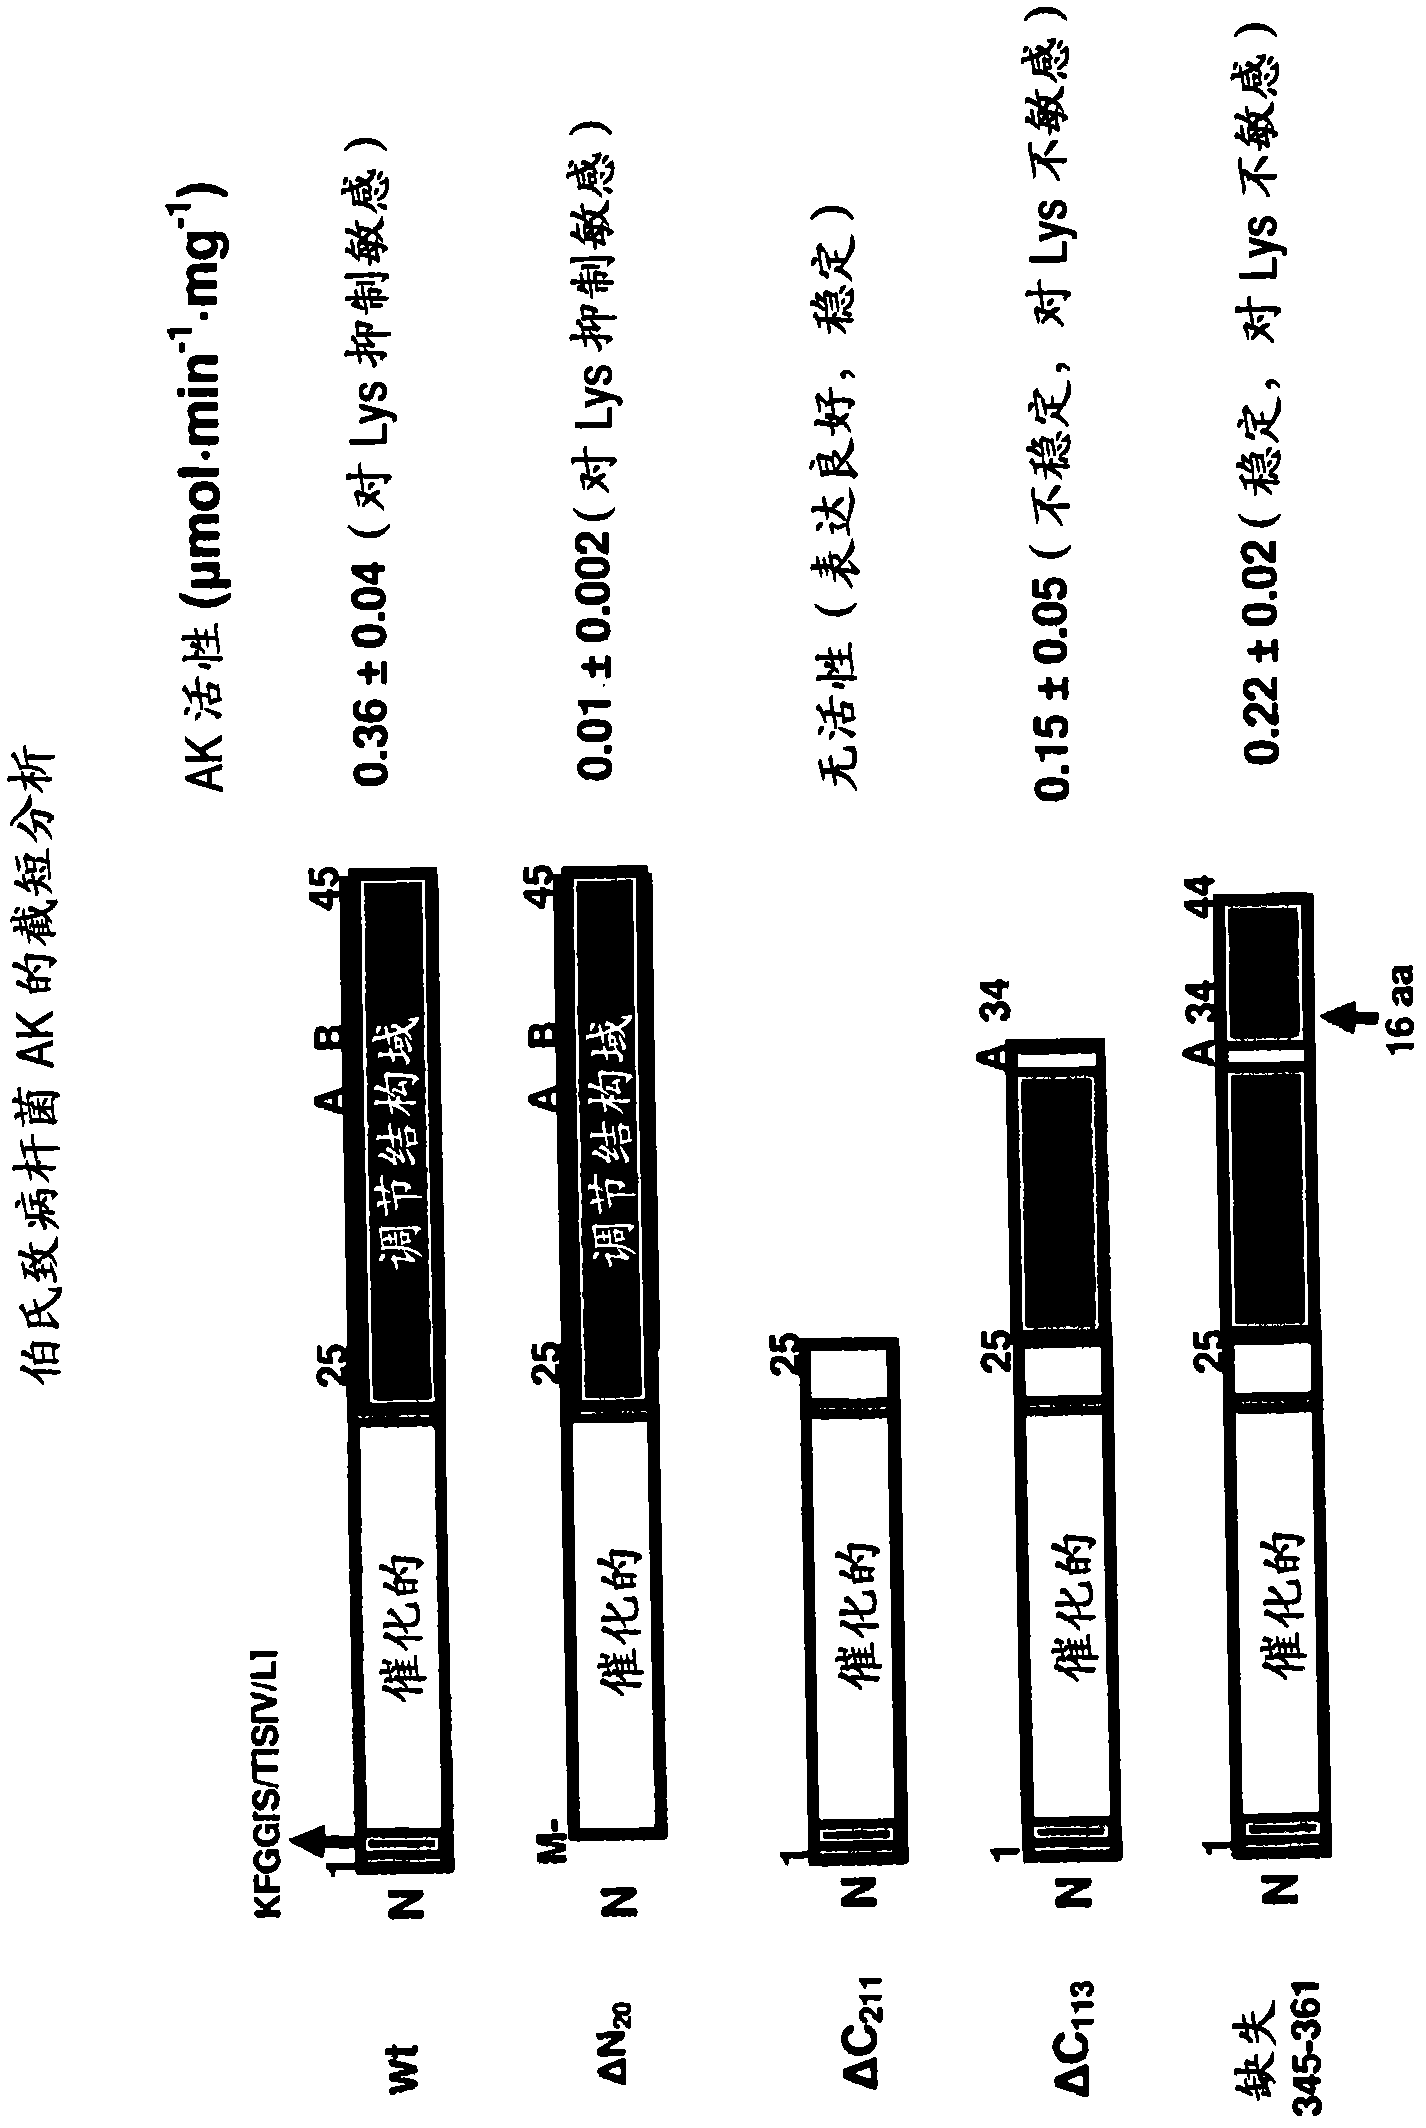 Compositions and methods for enhancing amino acid levels in plants